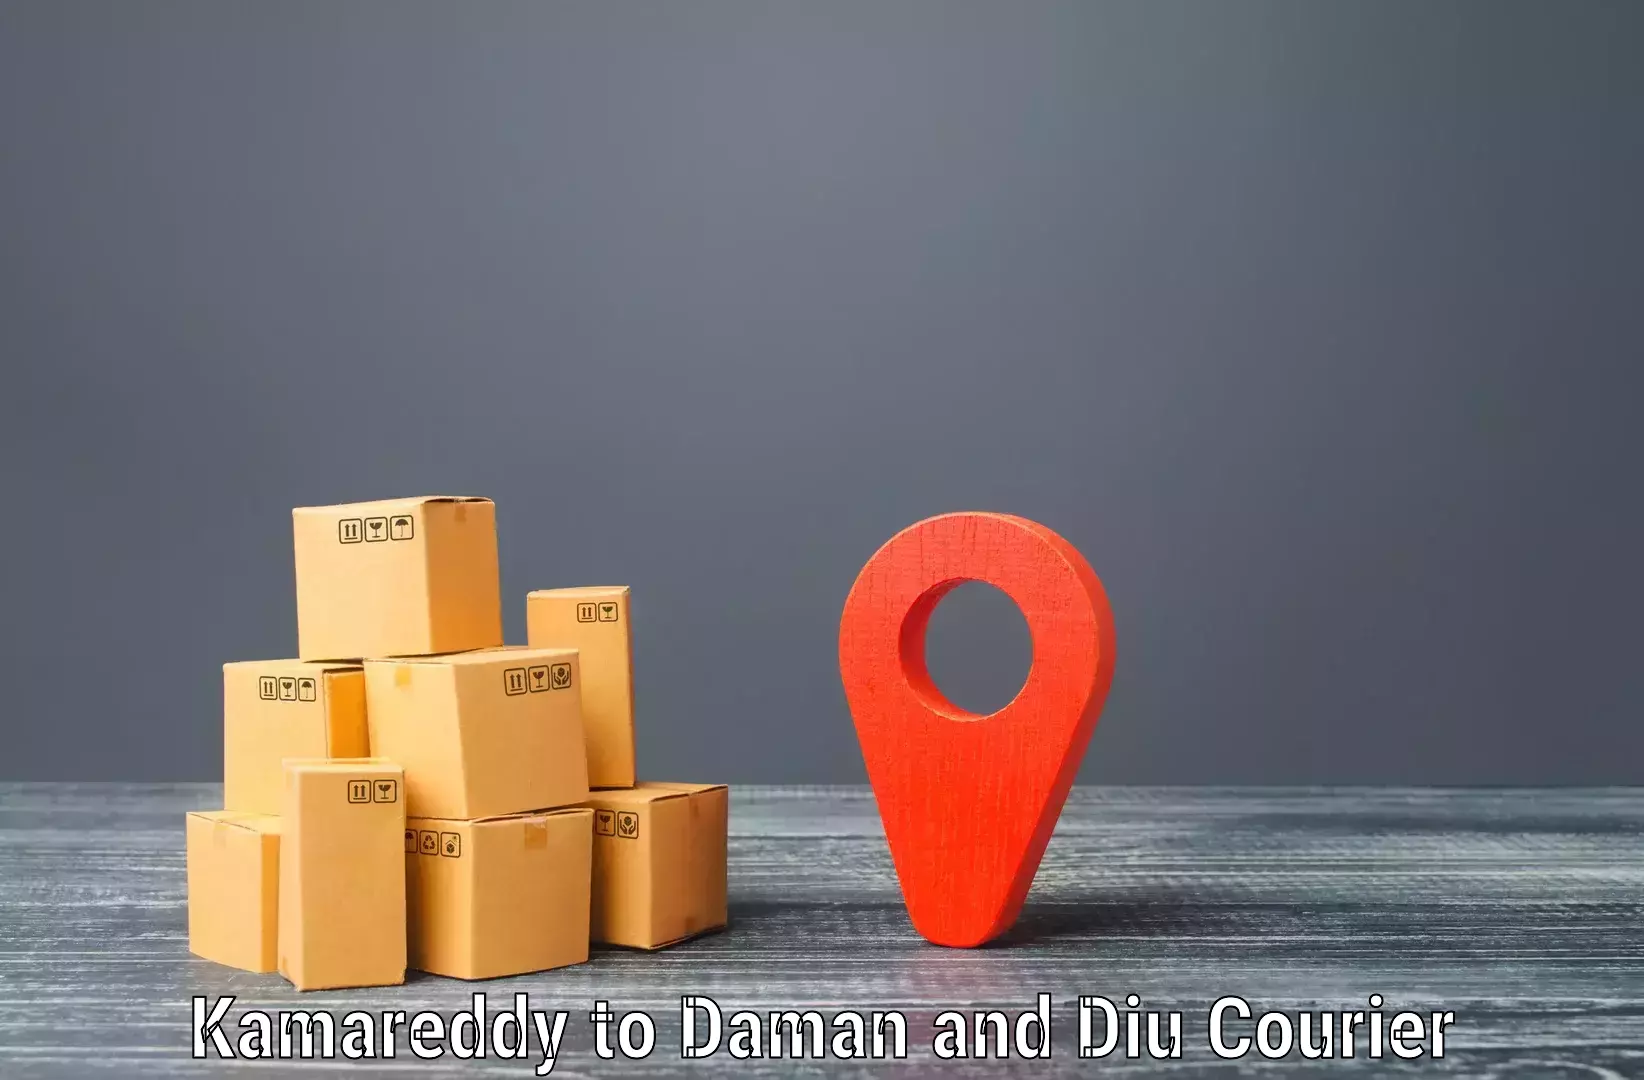 Same-day delivery options Kamareddy to Daman